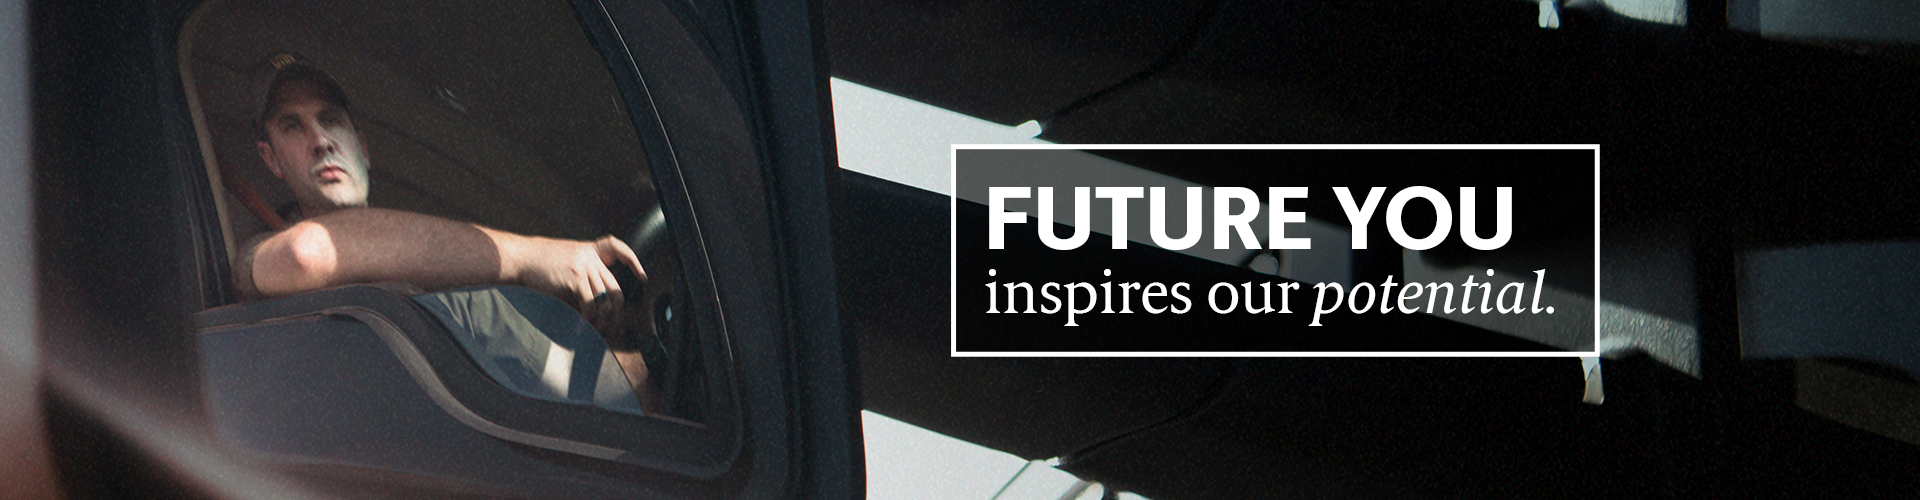 FUTURE YOU inspires our potential.